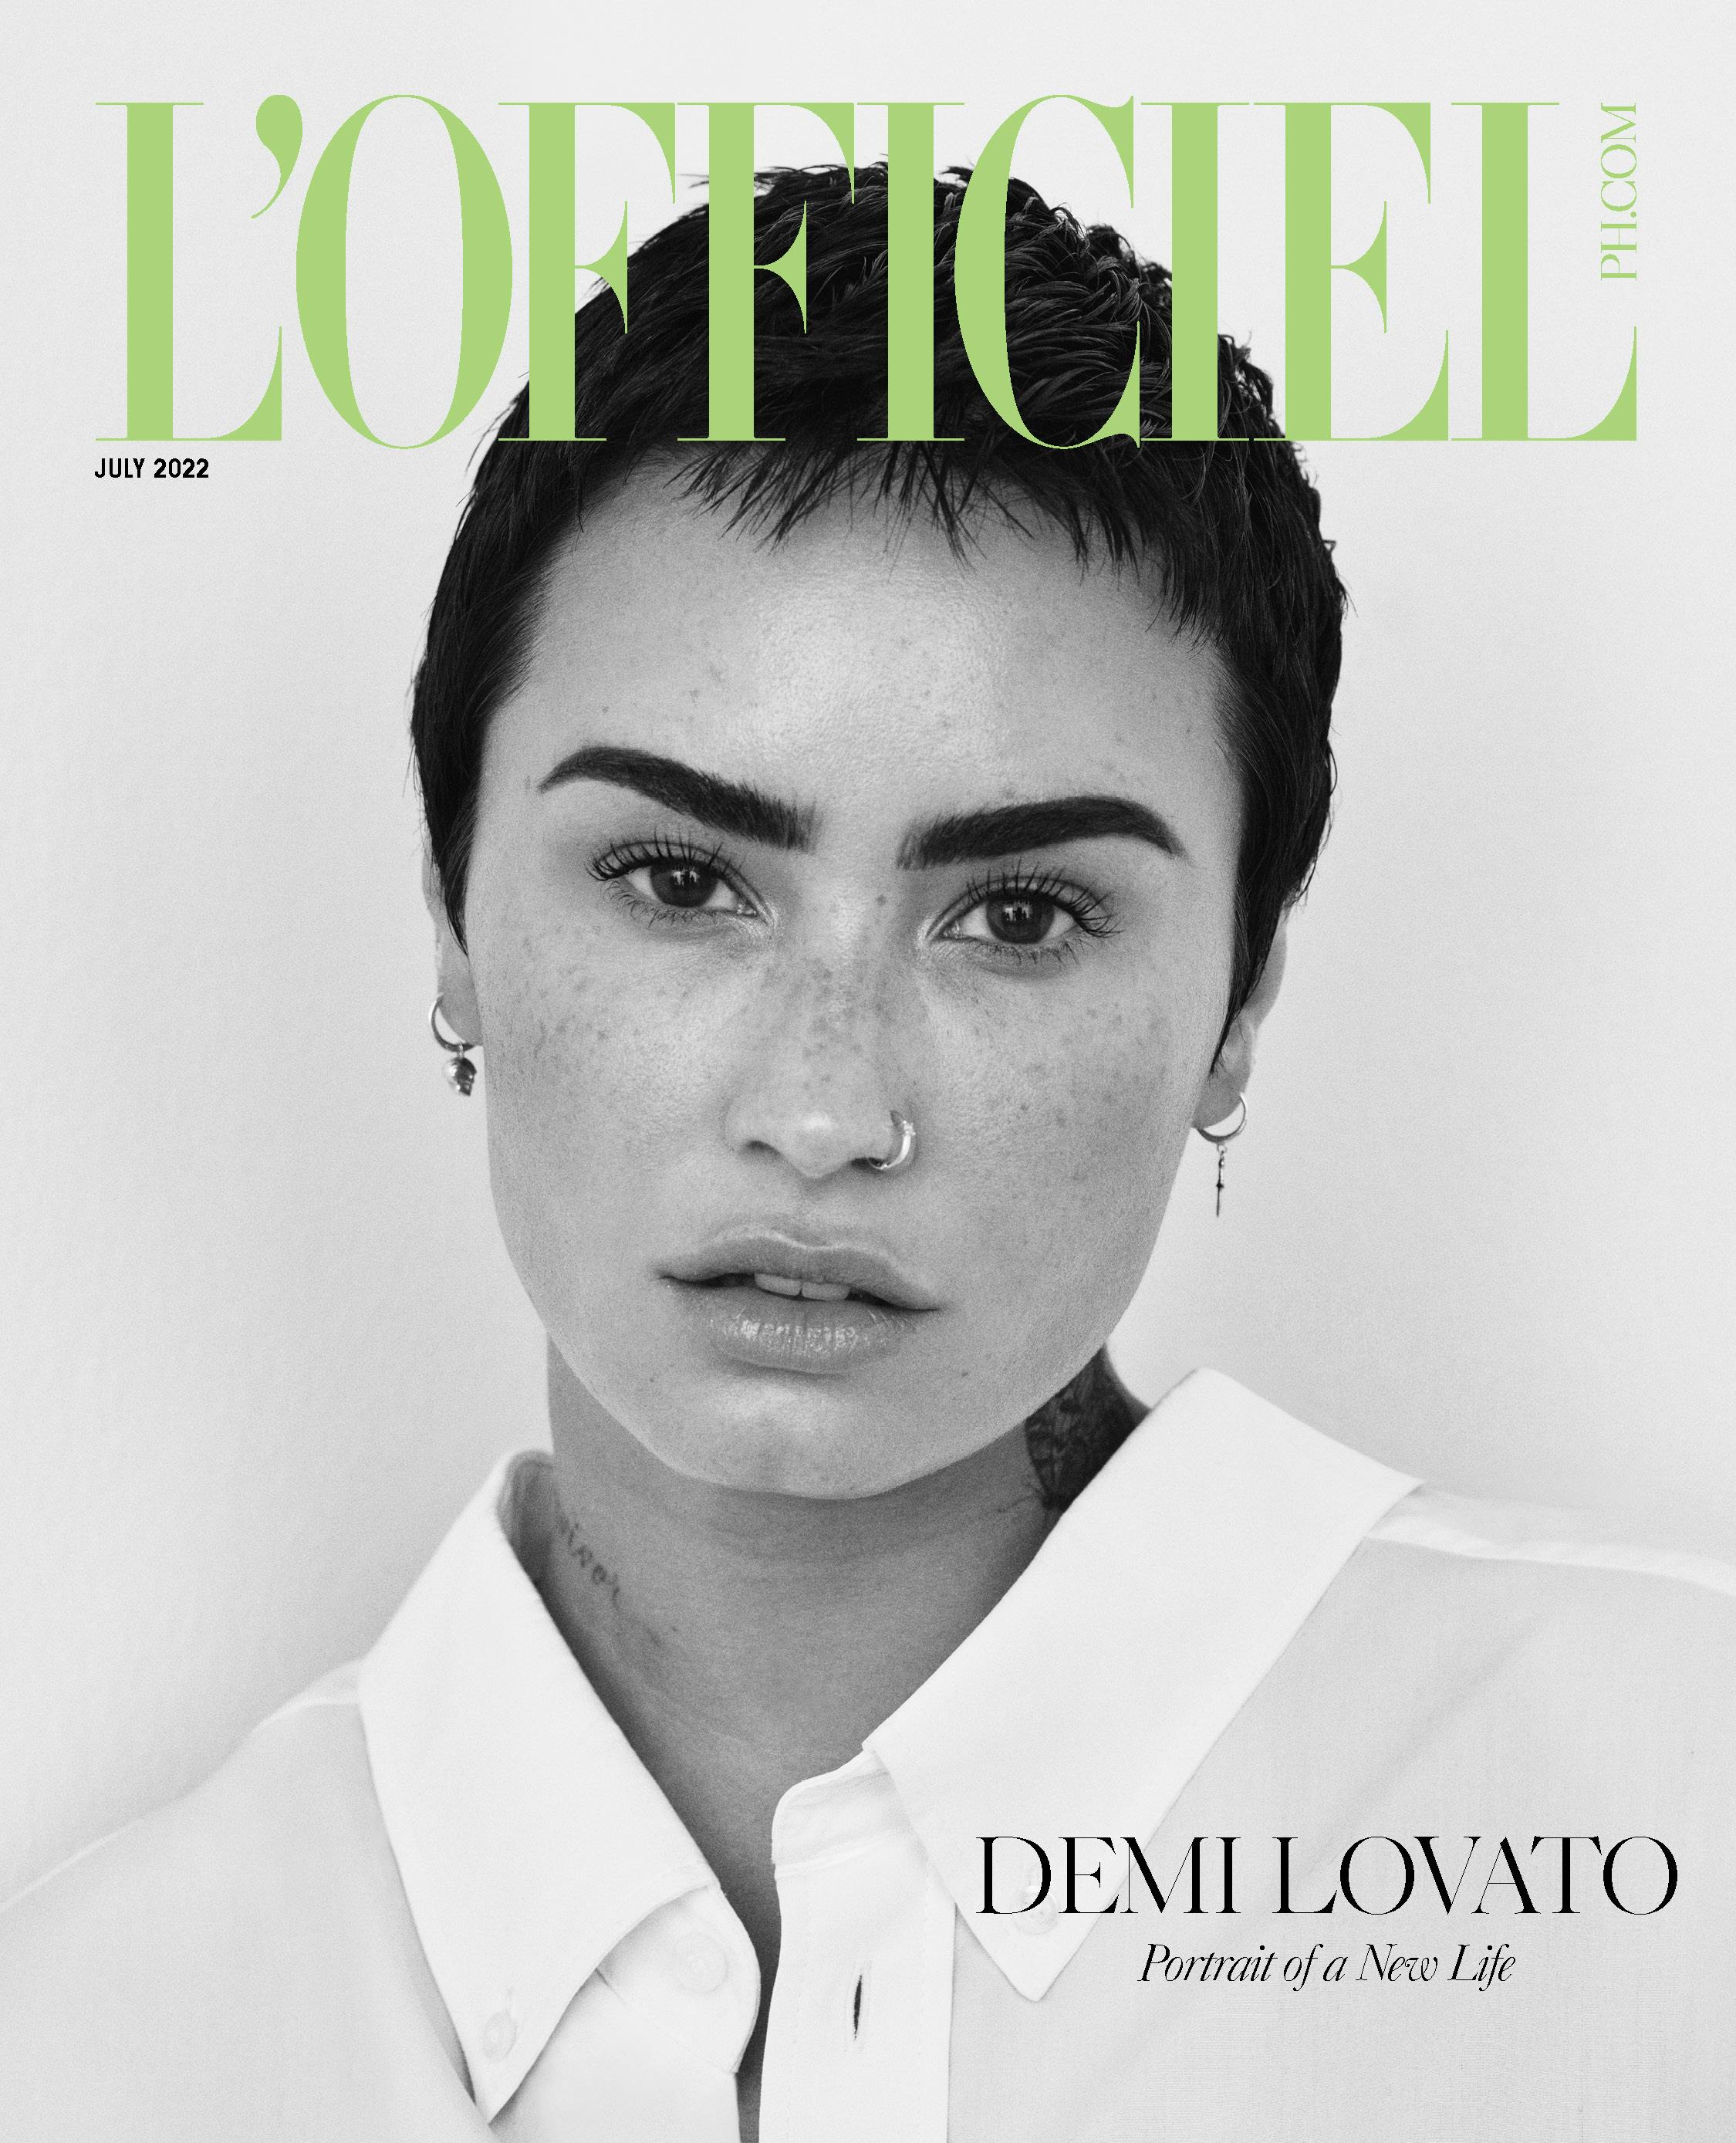 Demi Lovato Is Back: Portrait of a New Life